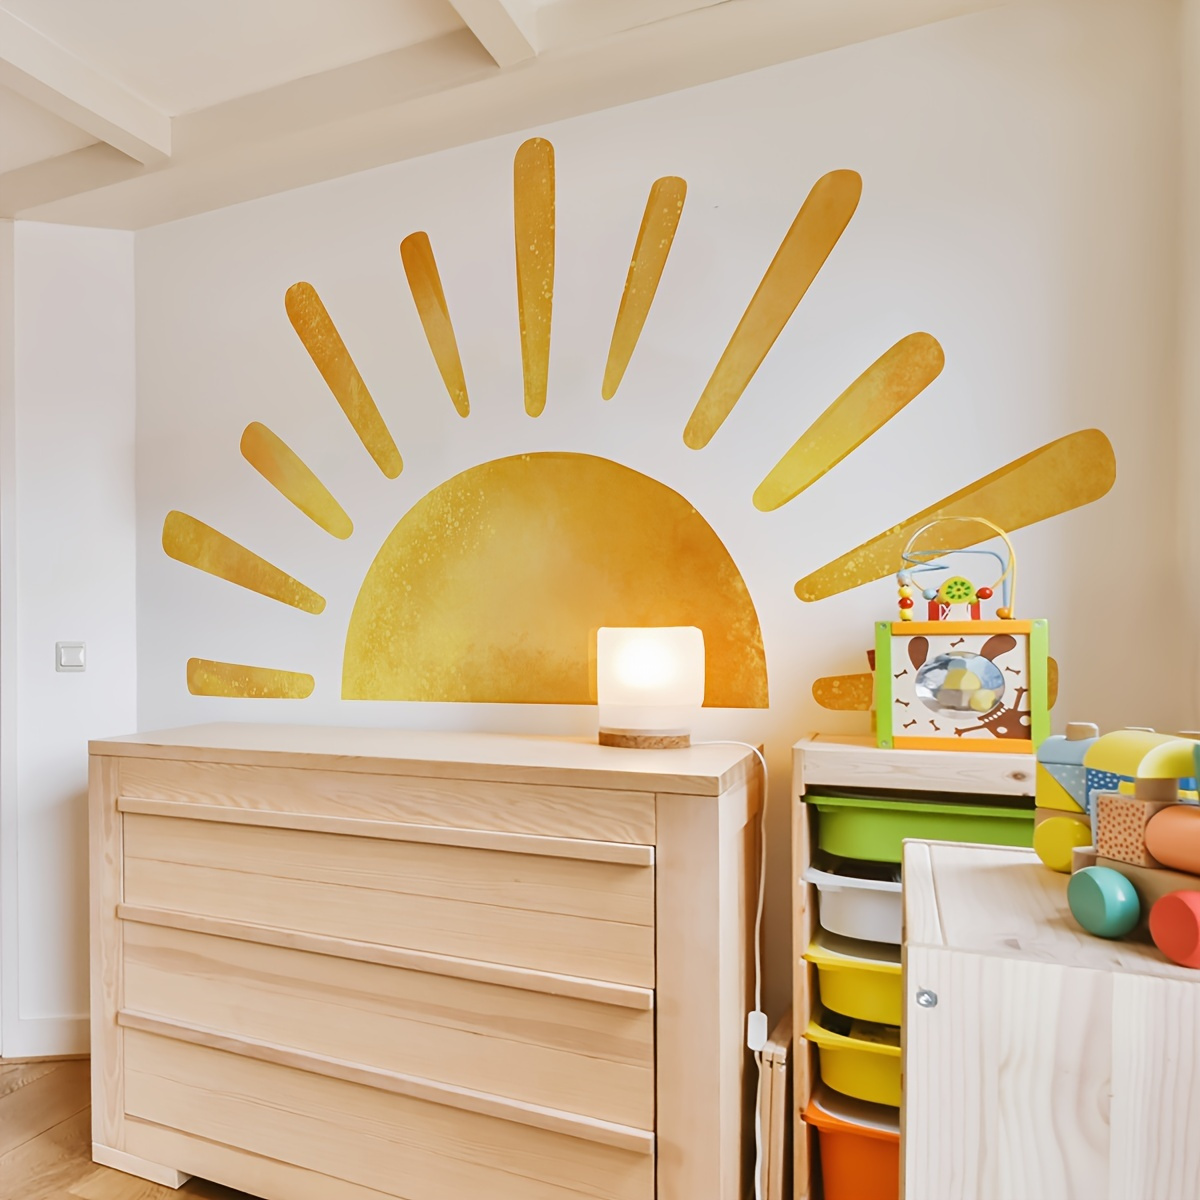 

1pc Sunburst Wall Decal, Large Pvc Self-adhesive Sticker, Contemporary Style, Home Bedroom Room Decor